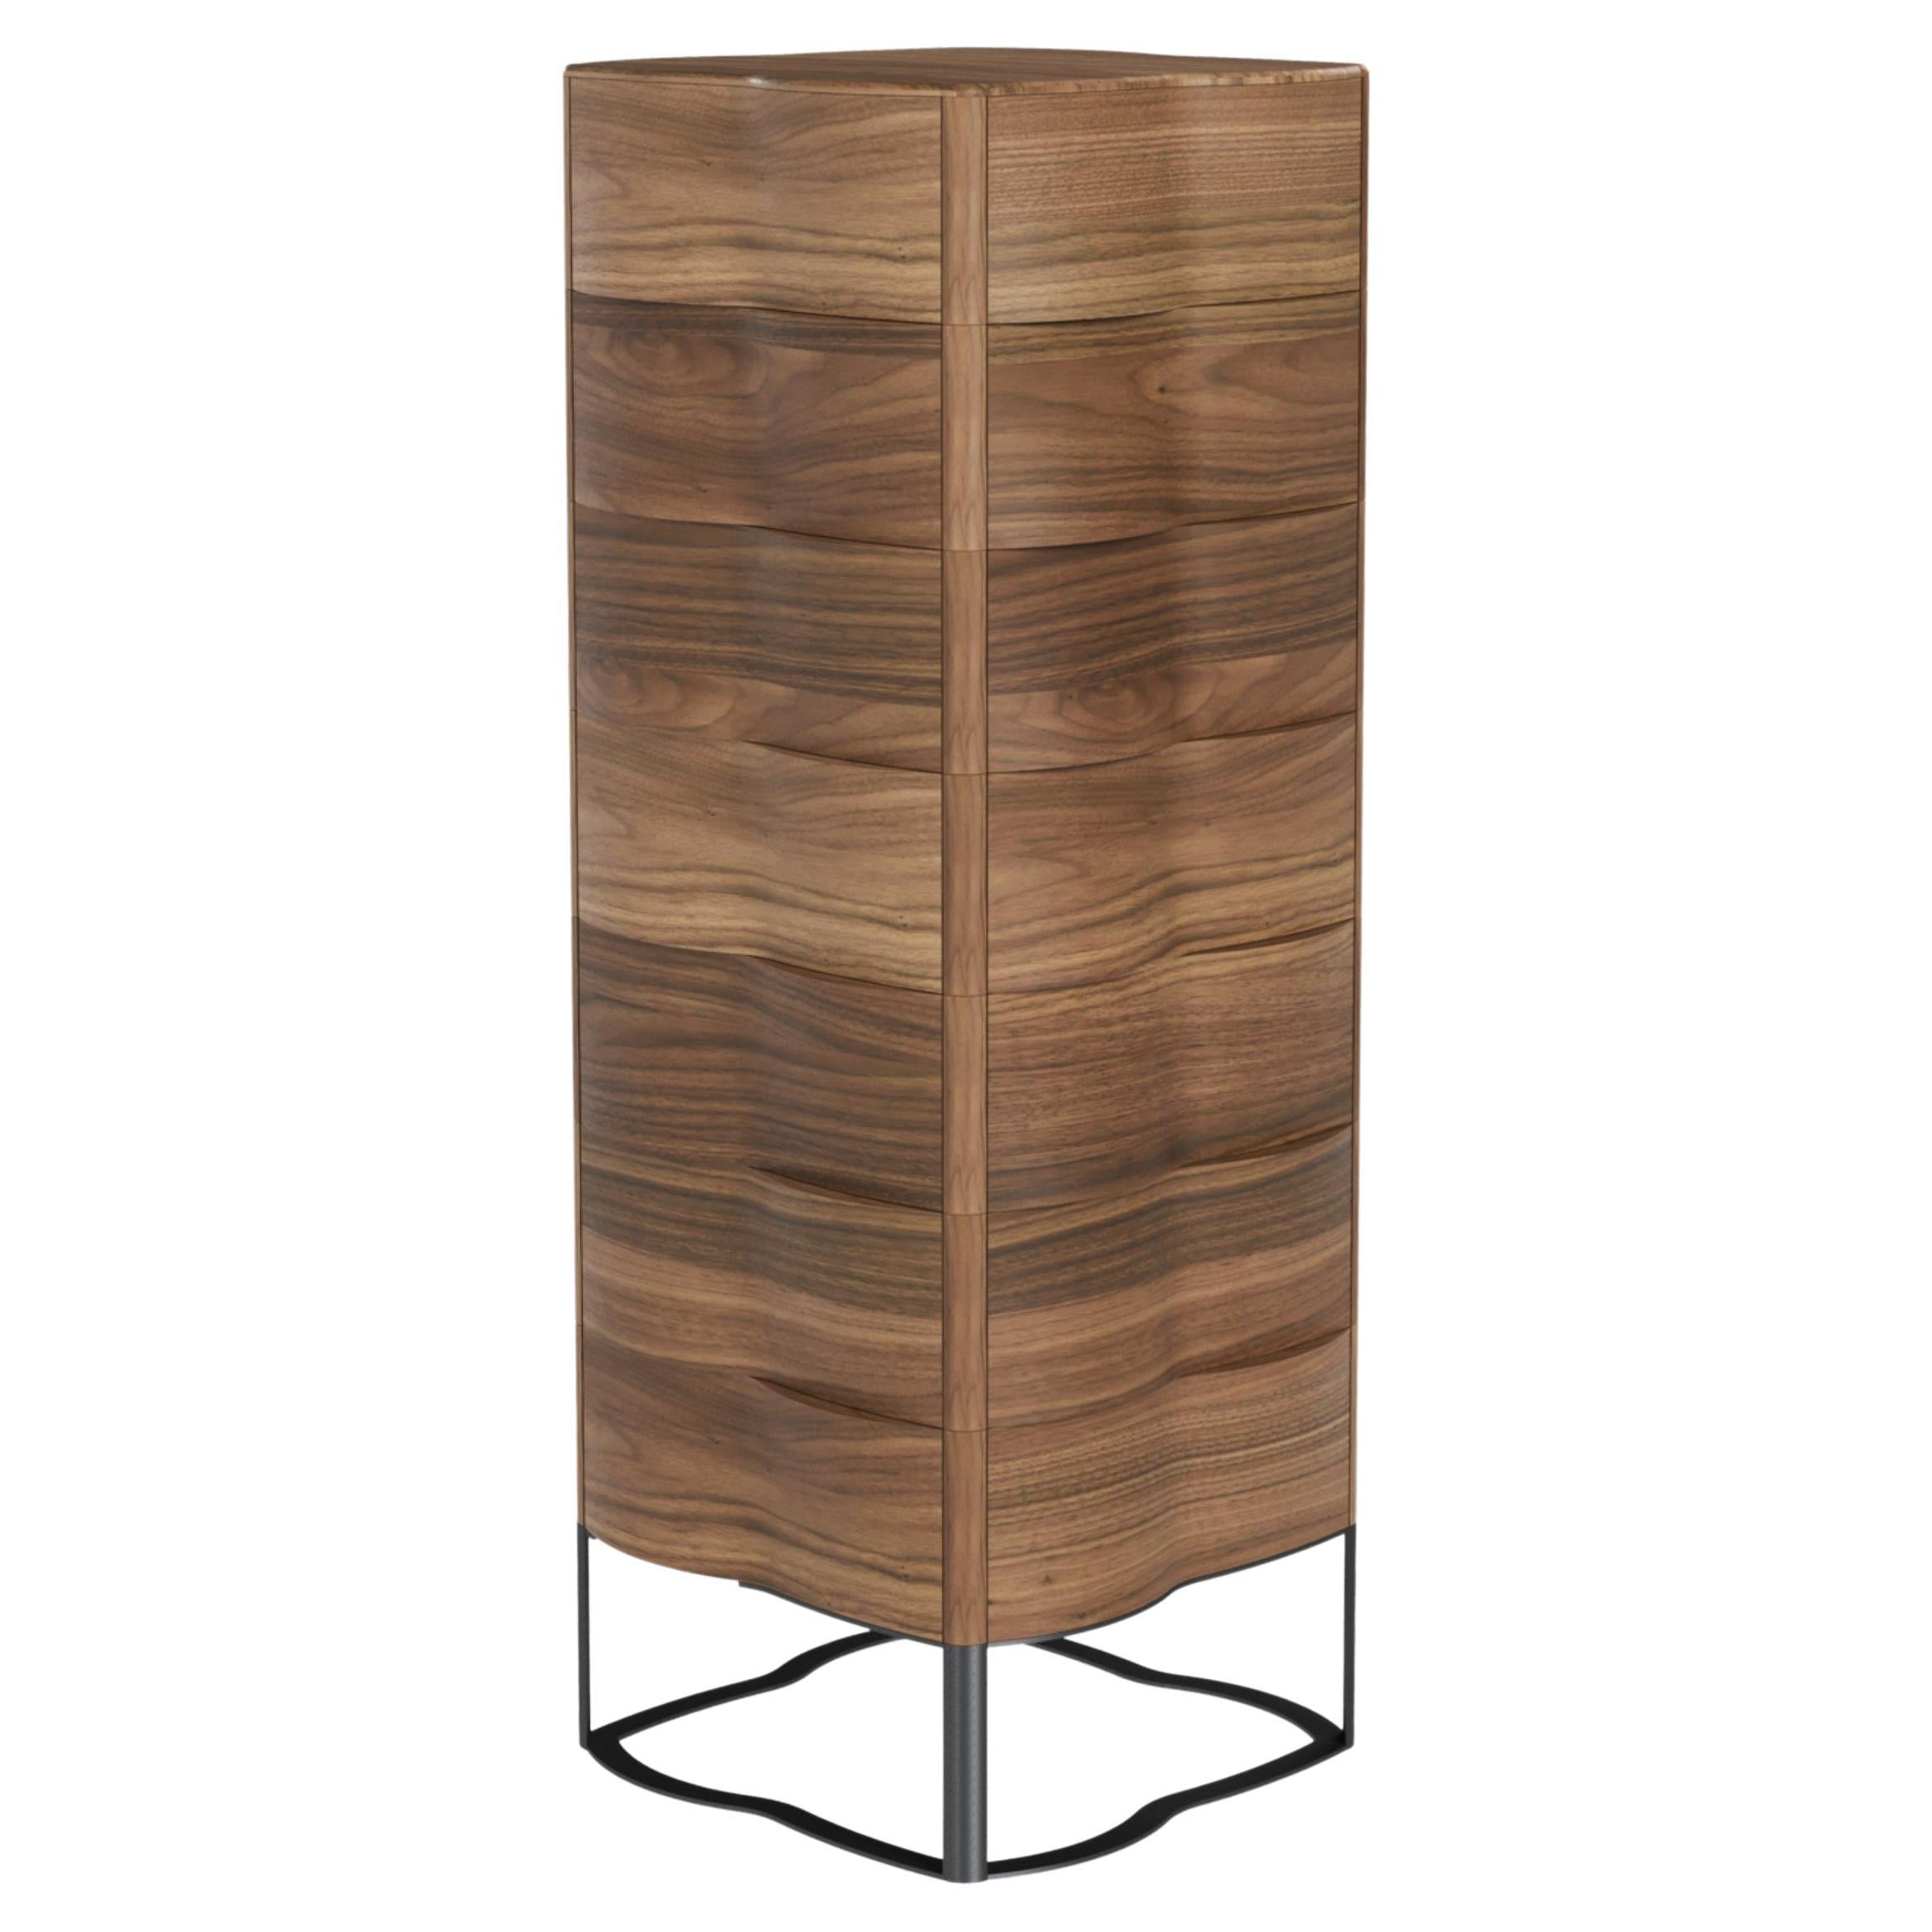 Walnut Wood Chest of Drawers Tall Sculptural Design For Sale